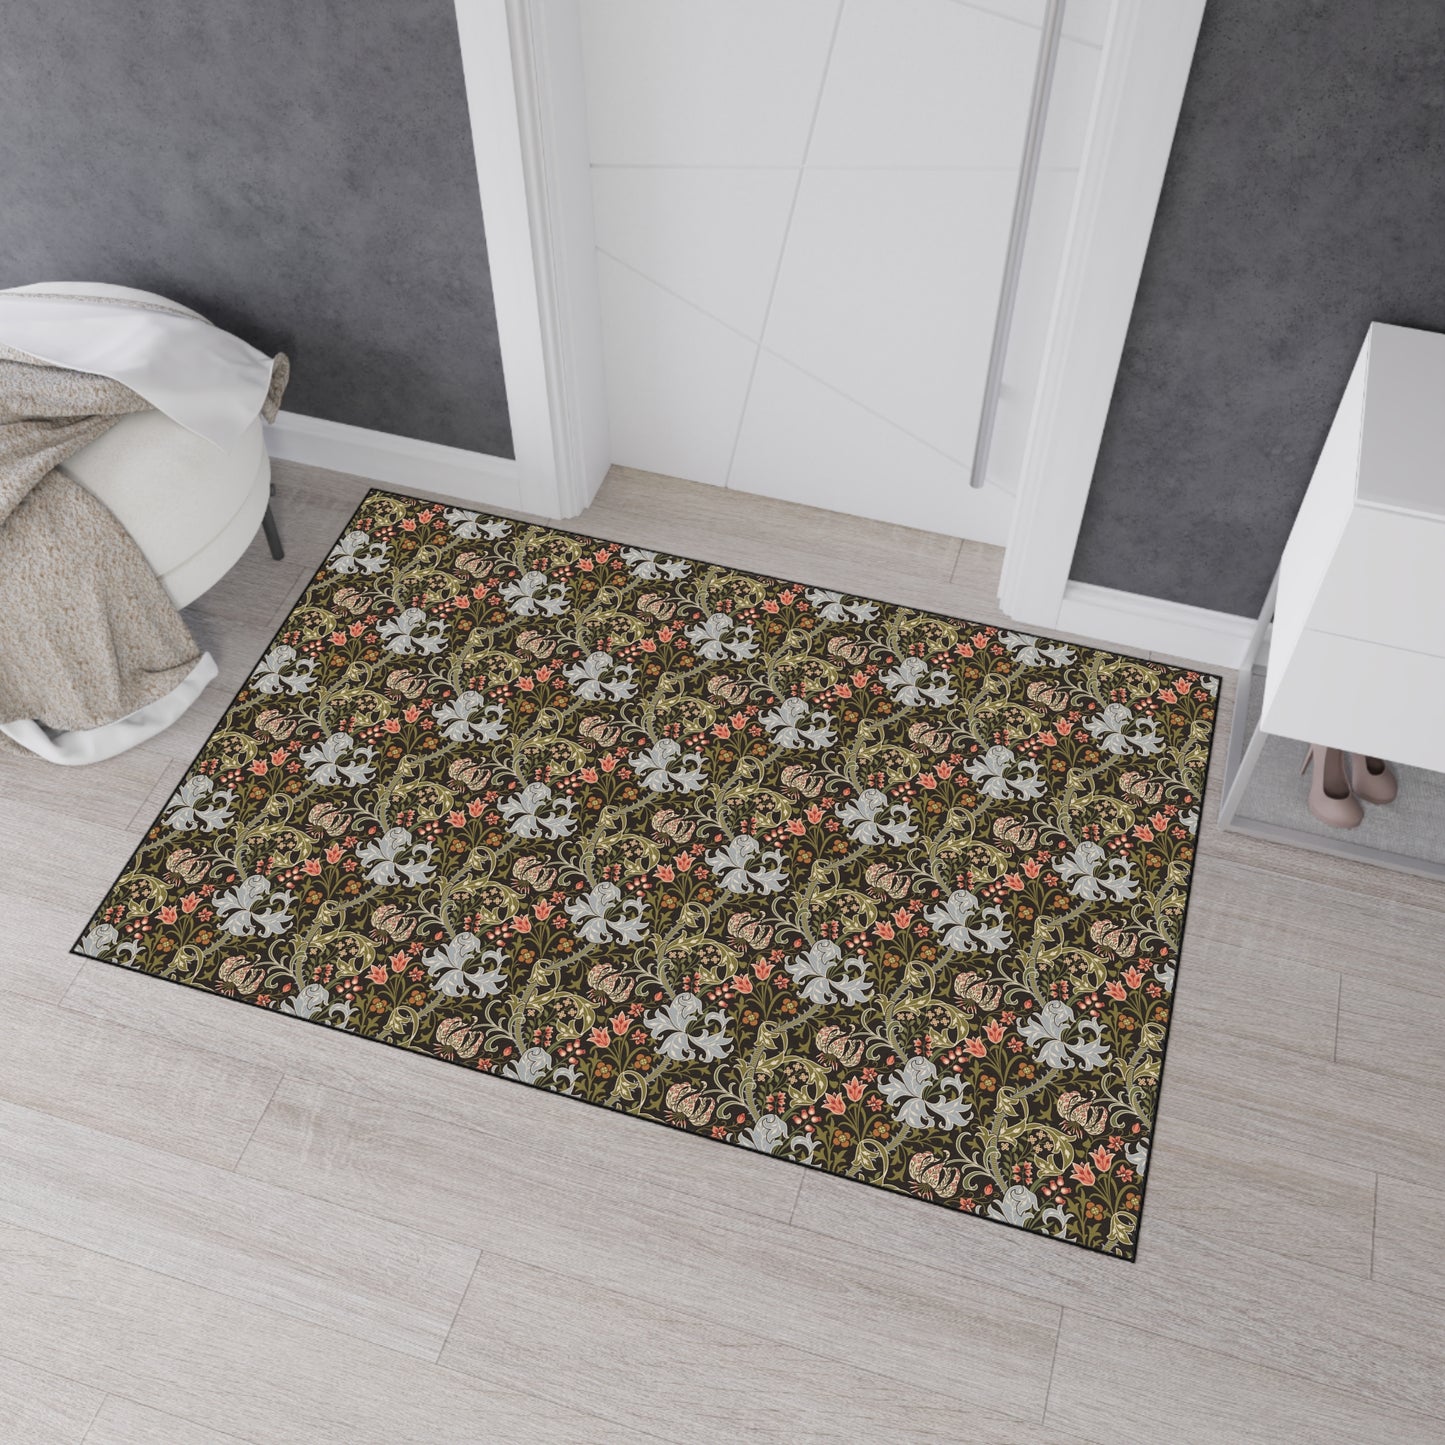 william-morris-co-heavy-duty-floor-mat-golden-lily-collection-midnight-9